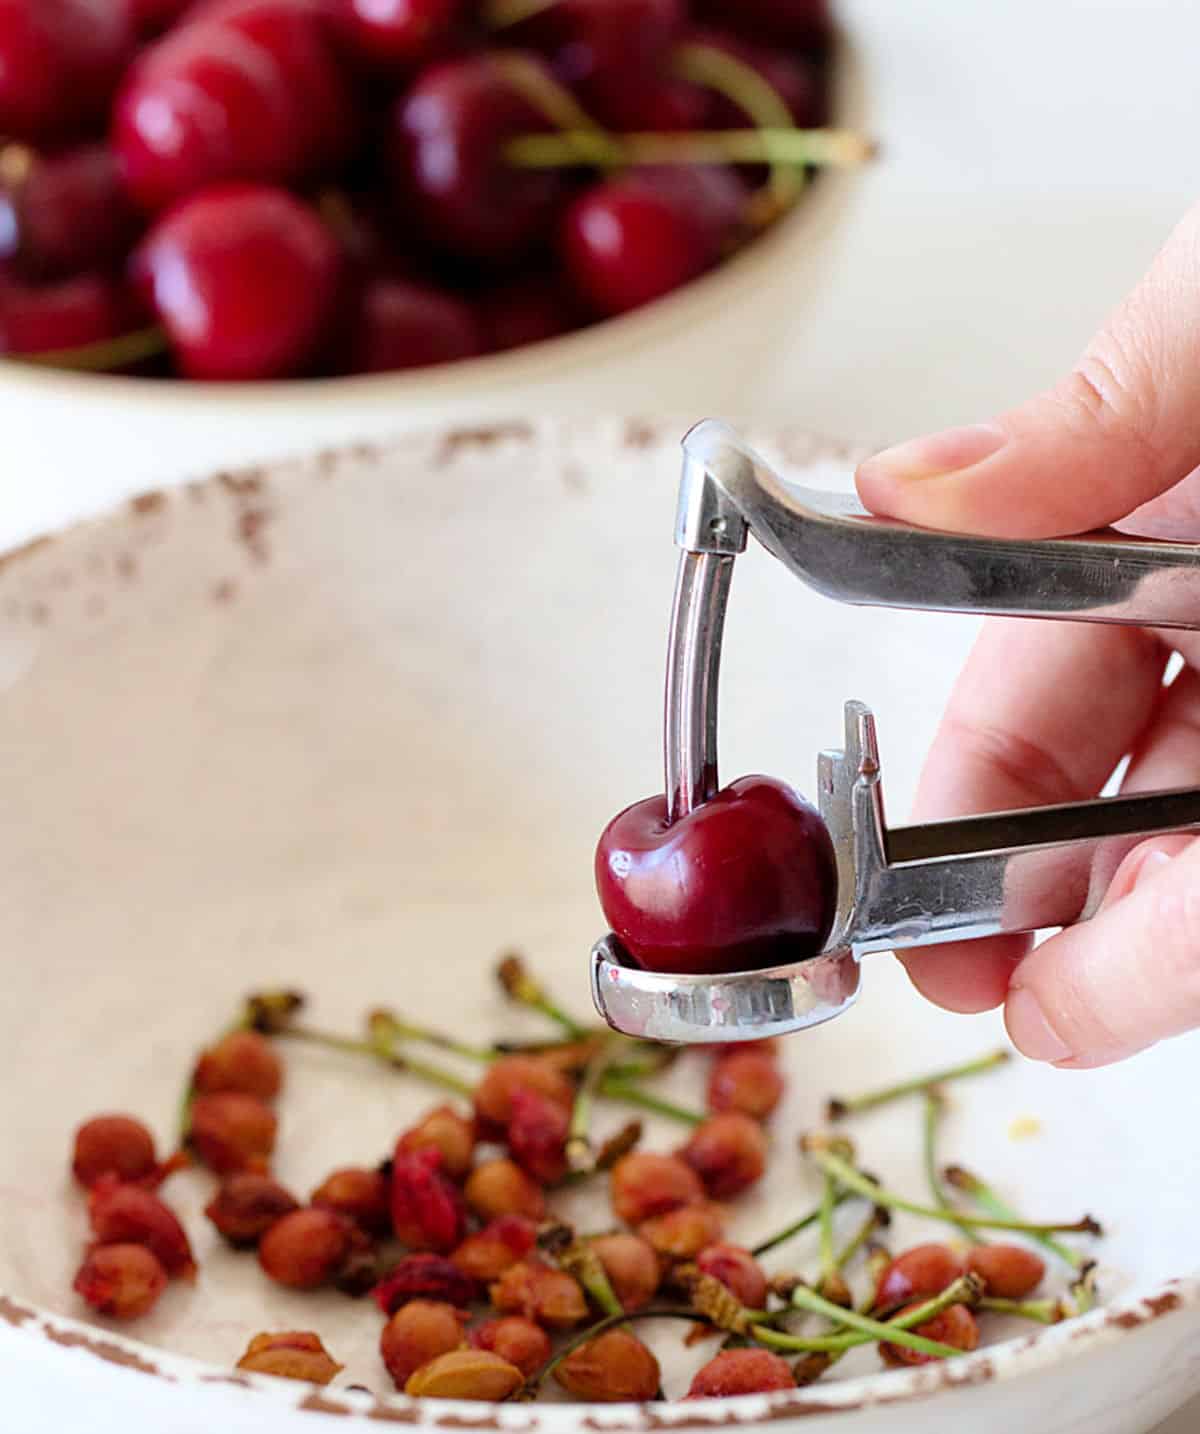 Hand pitting cherries with a cherry pitter over a white bowl.